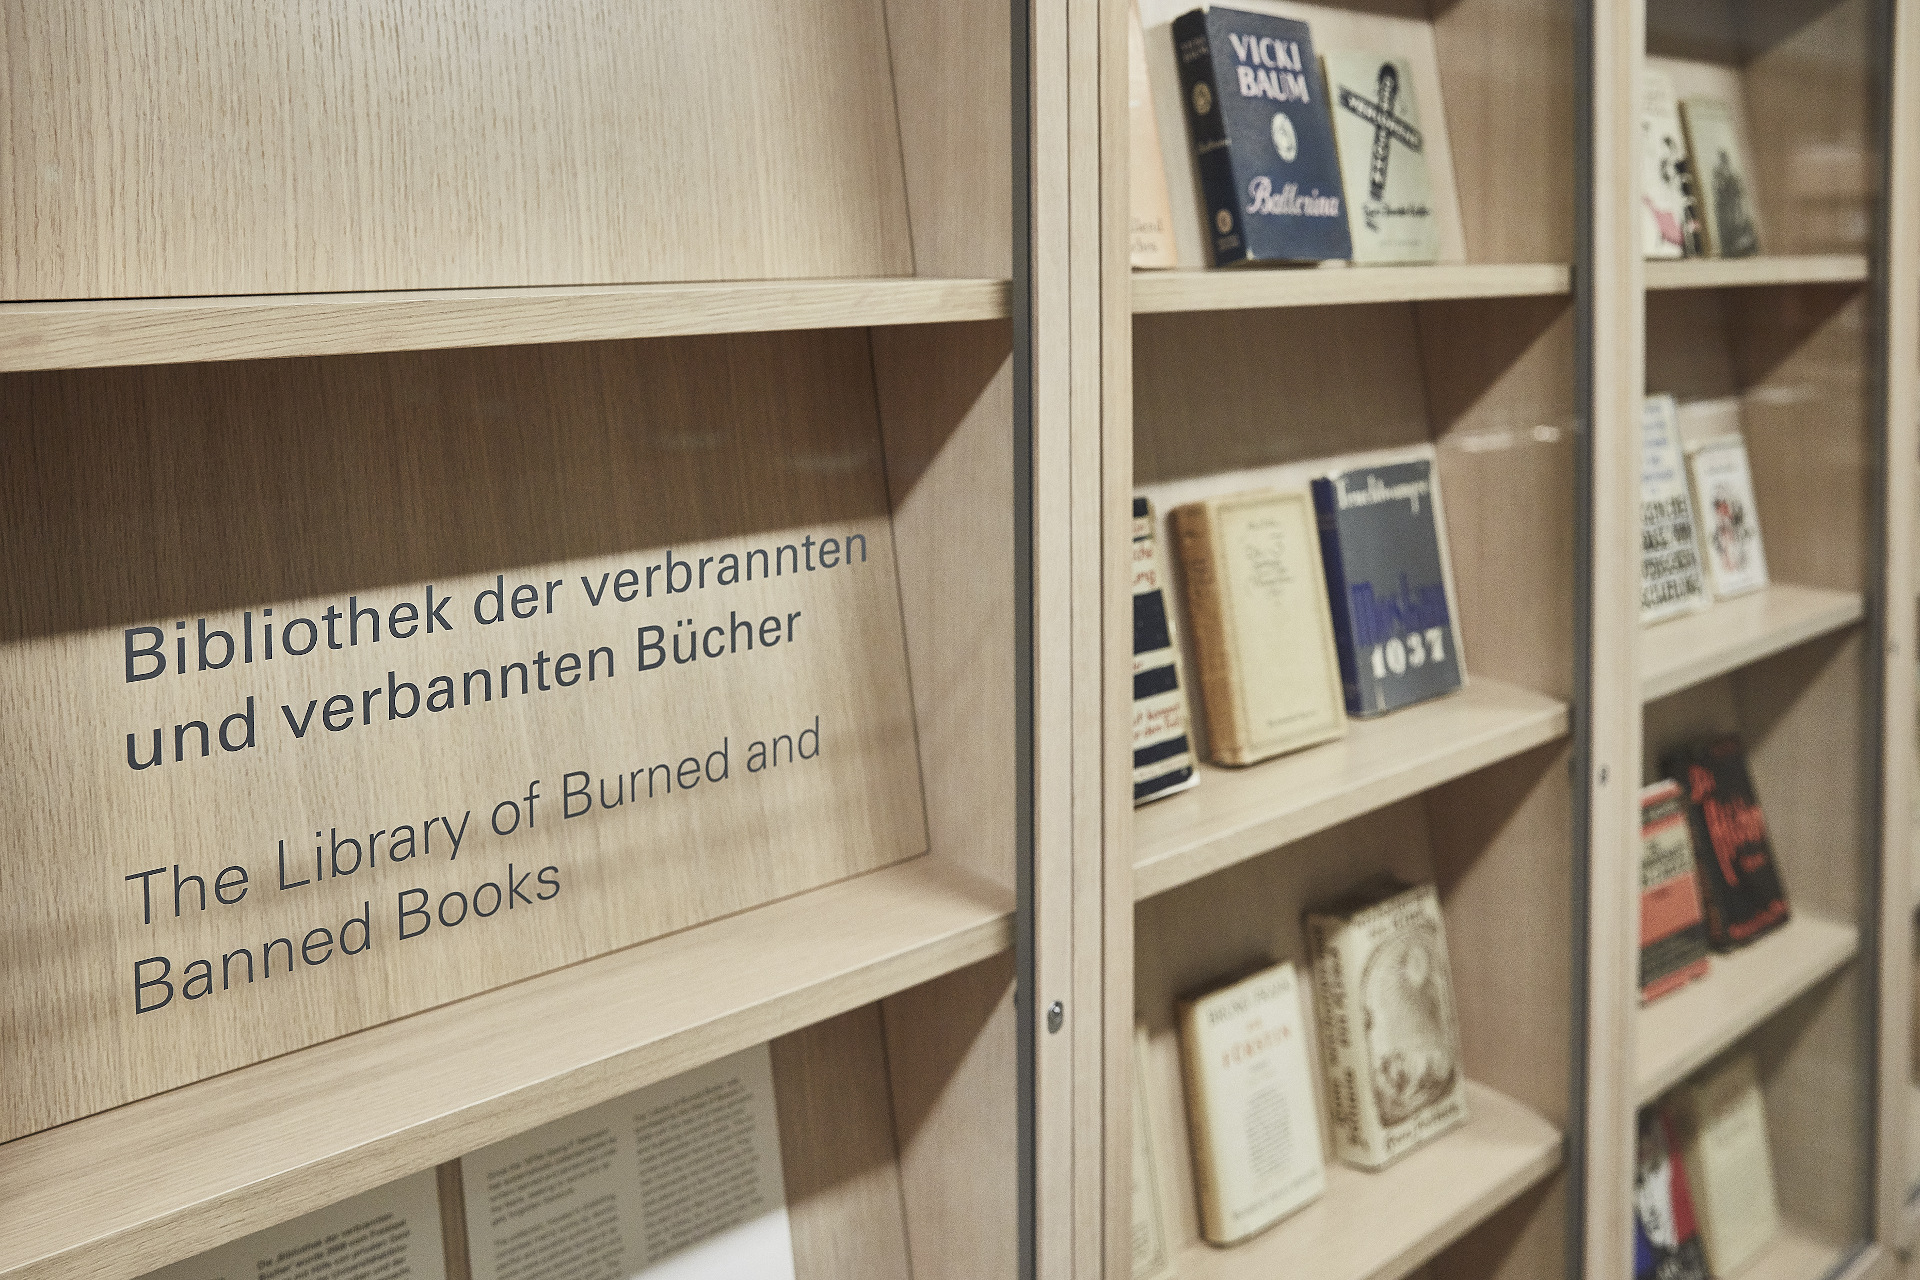 “The Library of Burned and Banned Books” is written on a glass wall. In the adjacent display cases there are a number of book covers.